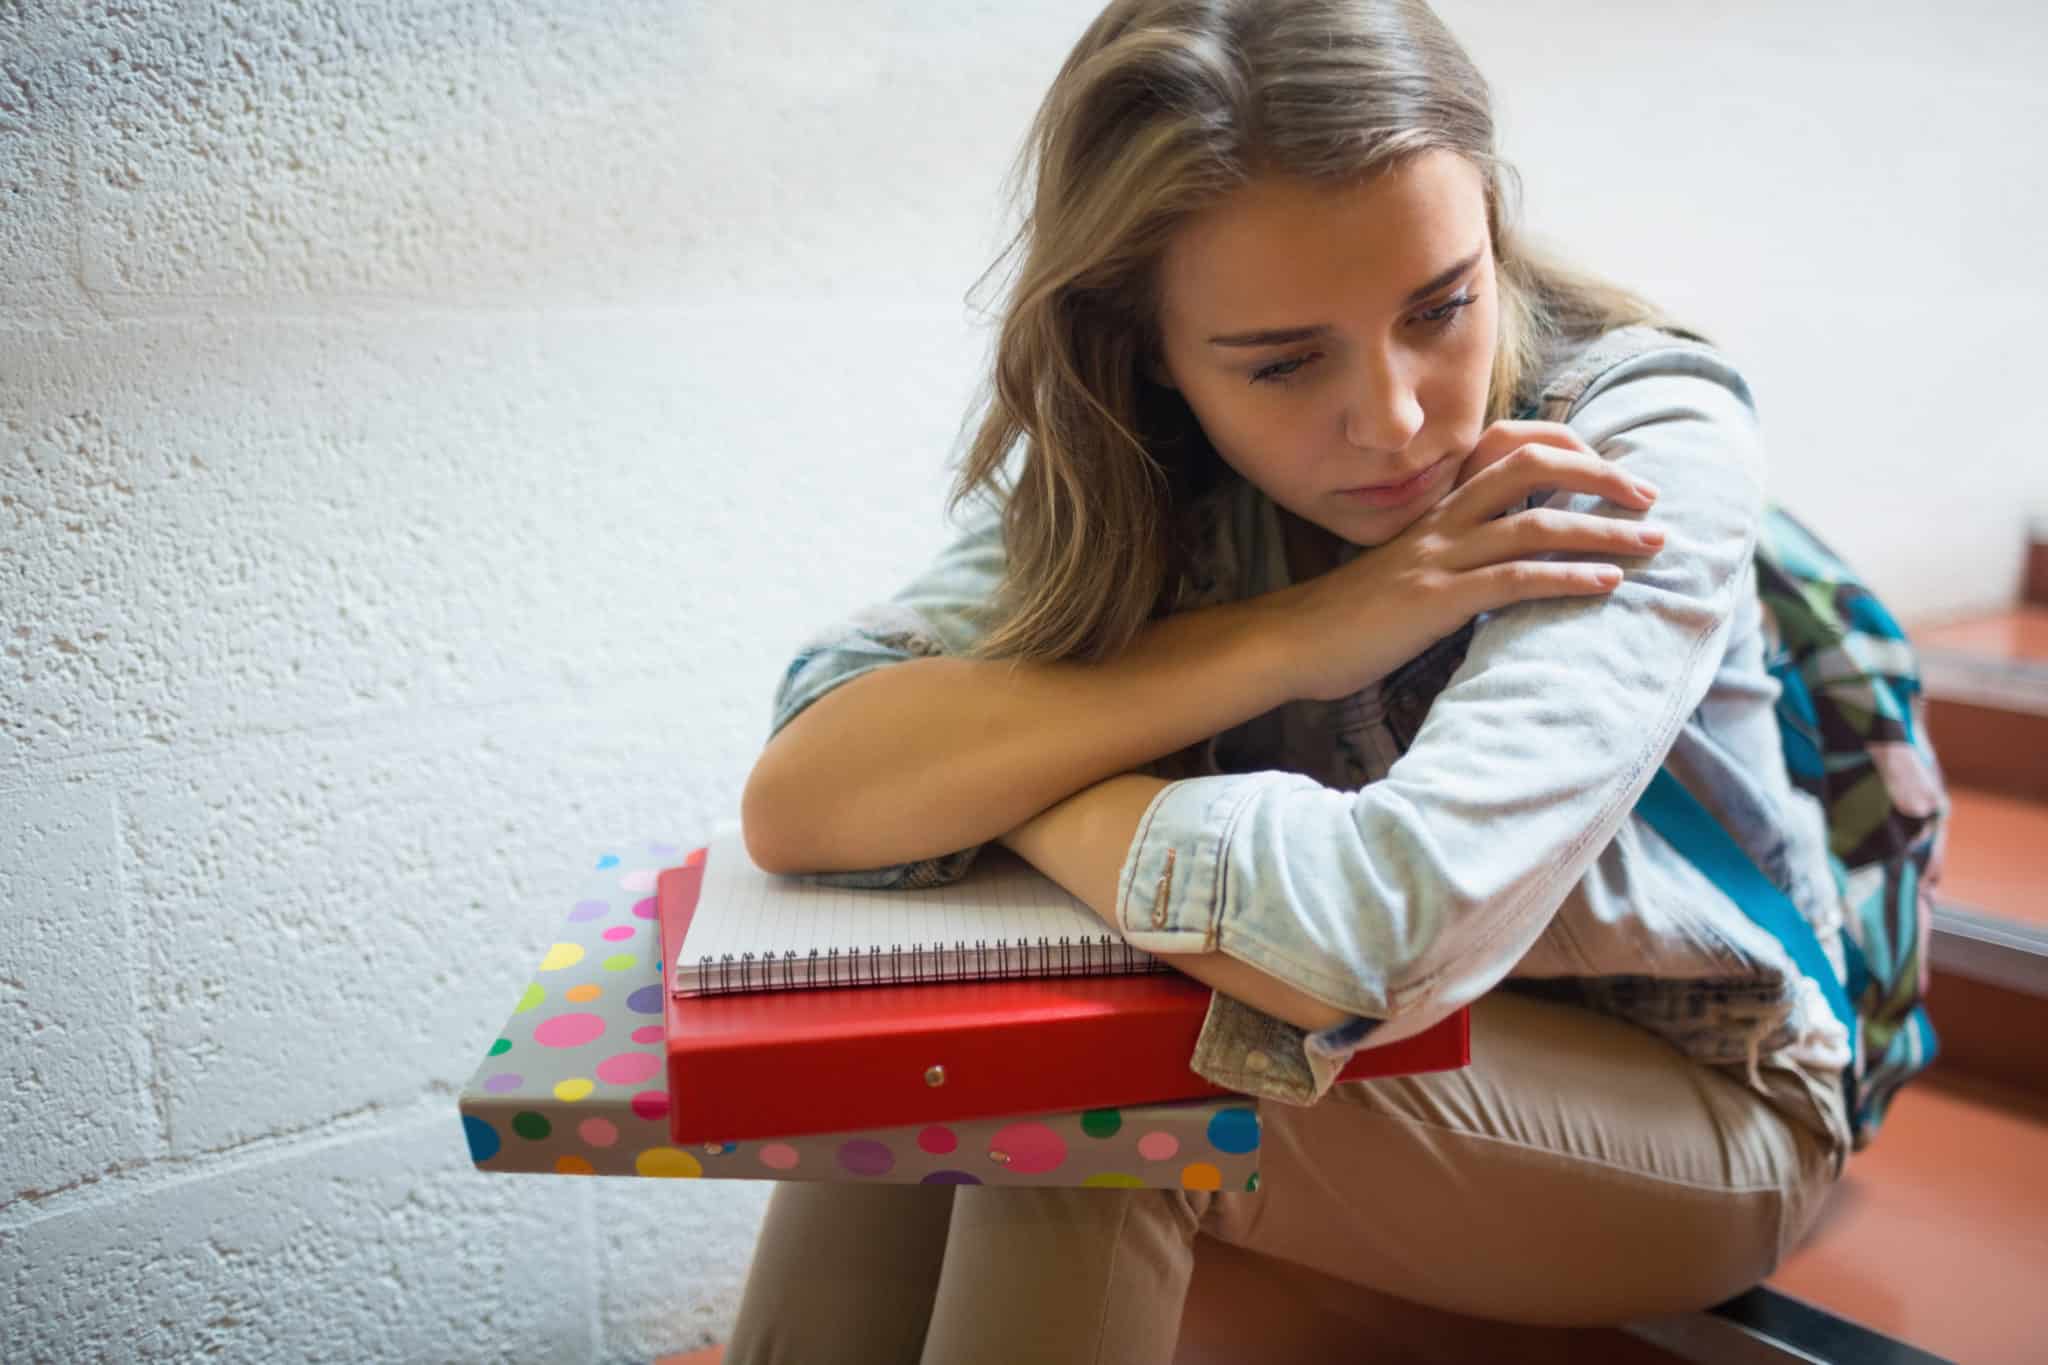 Girl with sad face sitting on stairs with books on her lap